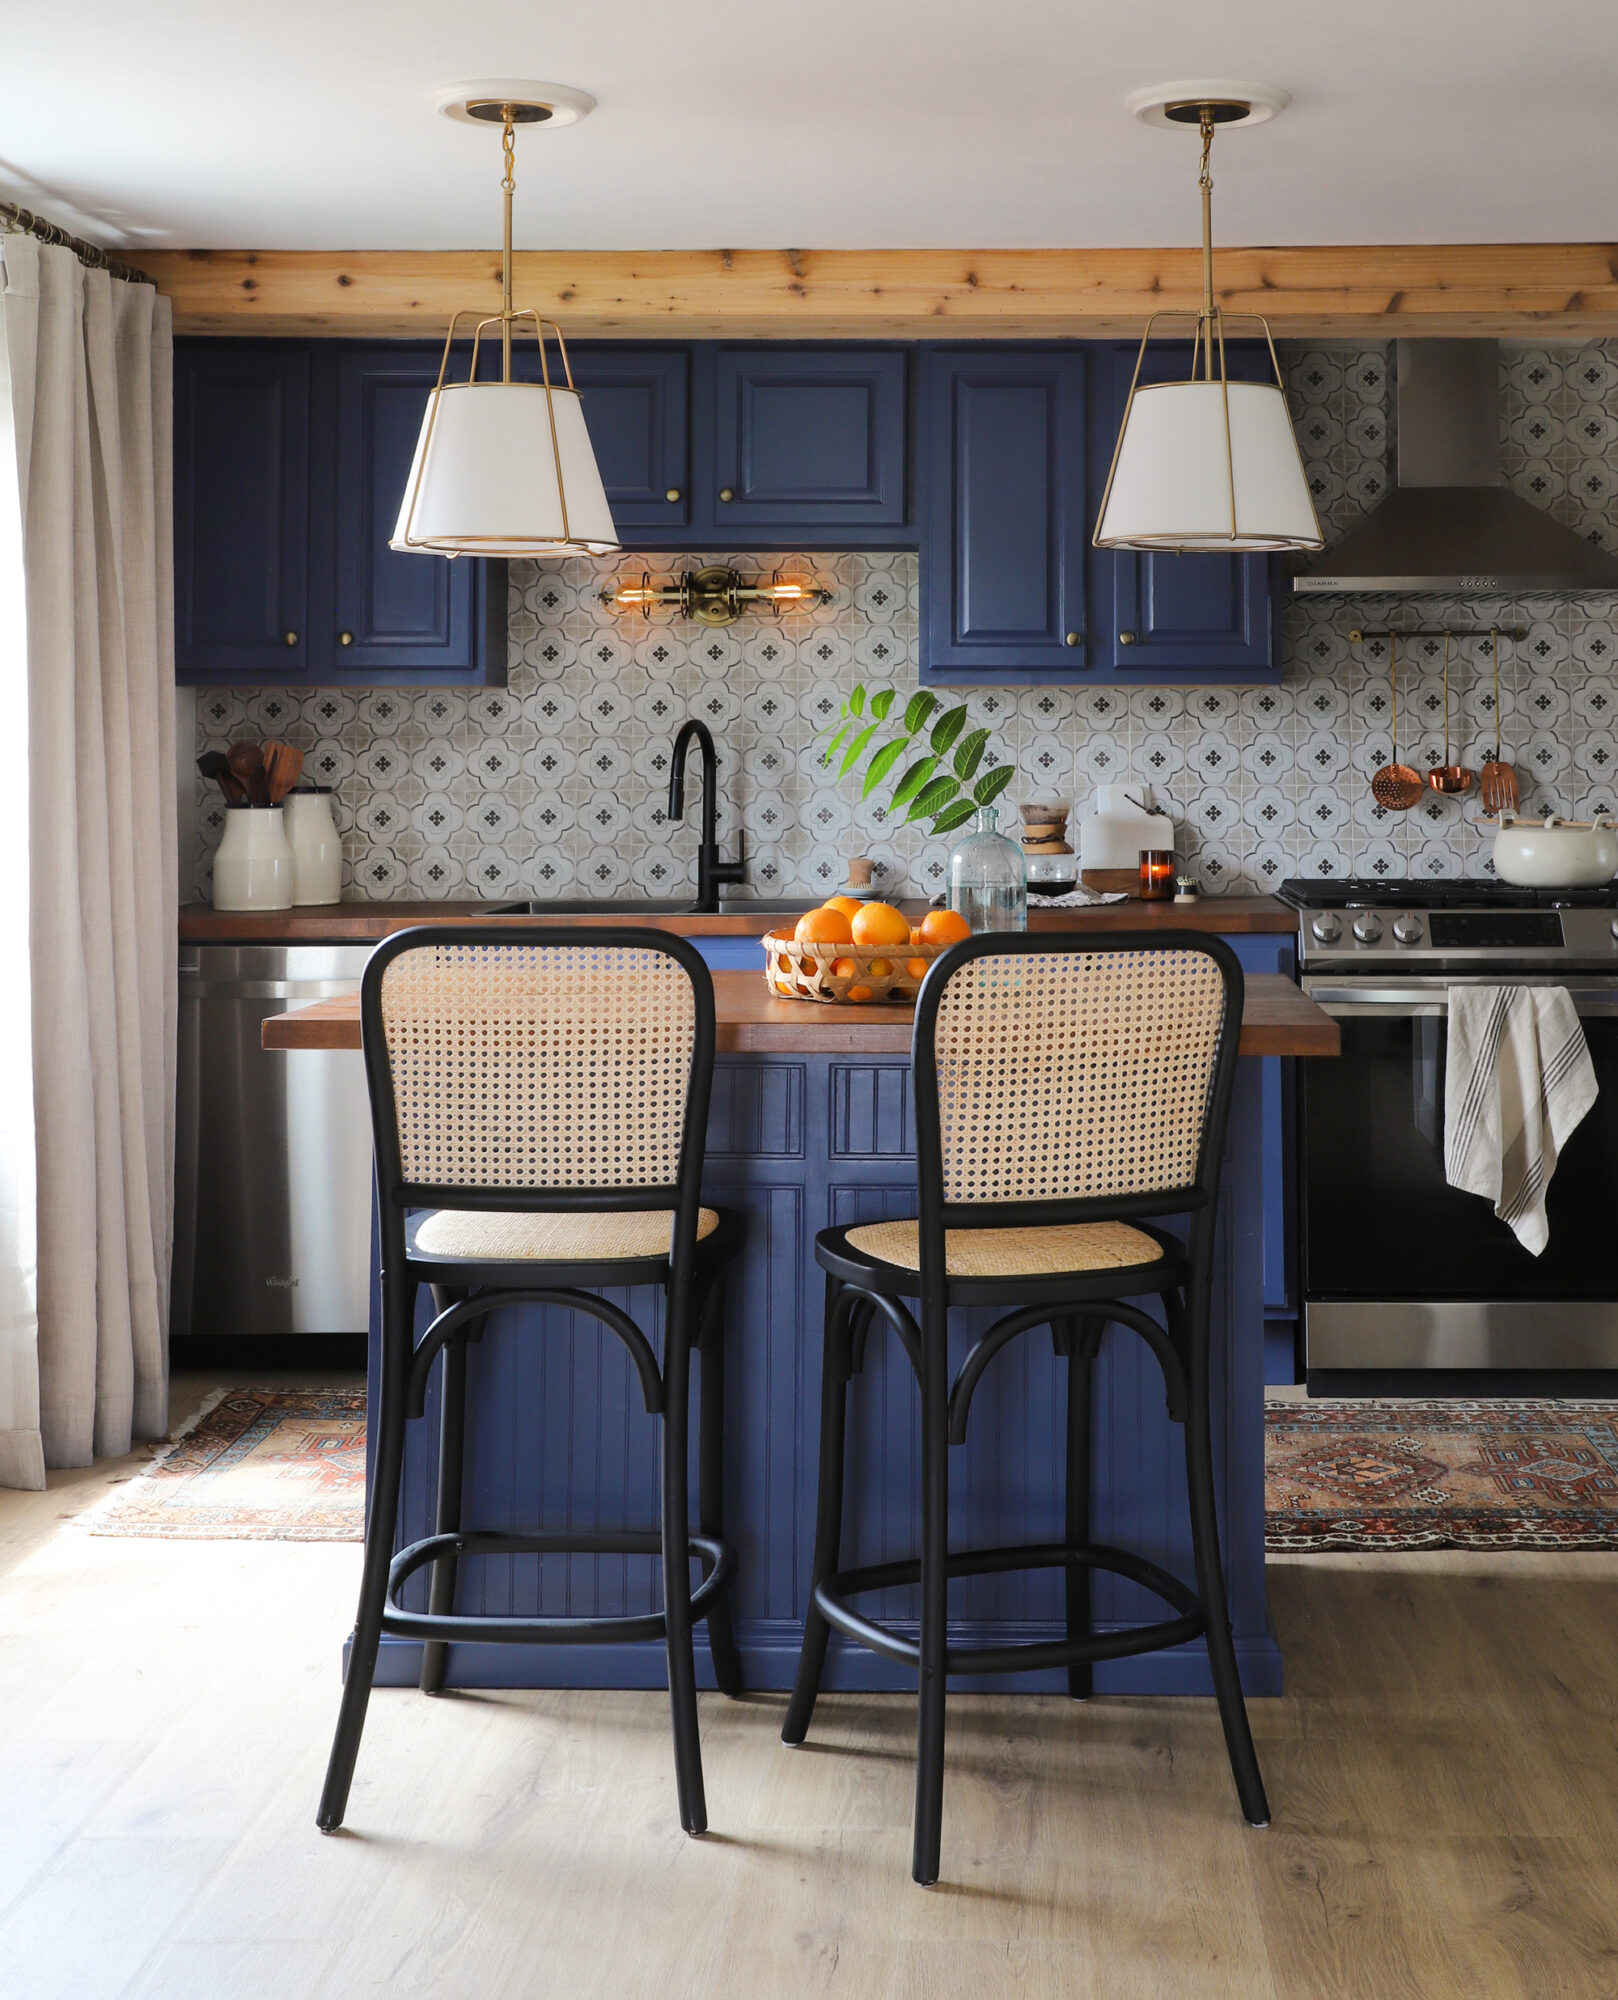 Photograph of newly renovated kitchen with rich, blue cabinets, patterned tile backsplash, gold pendant lights and cane bar stools.